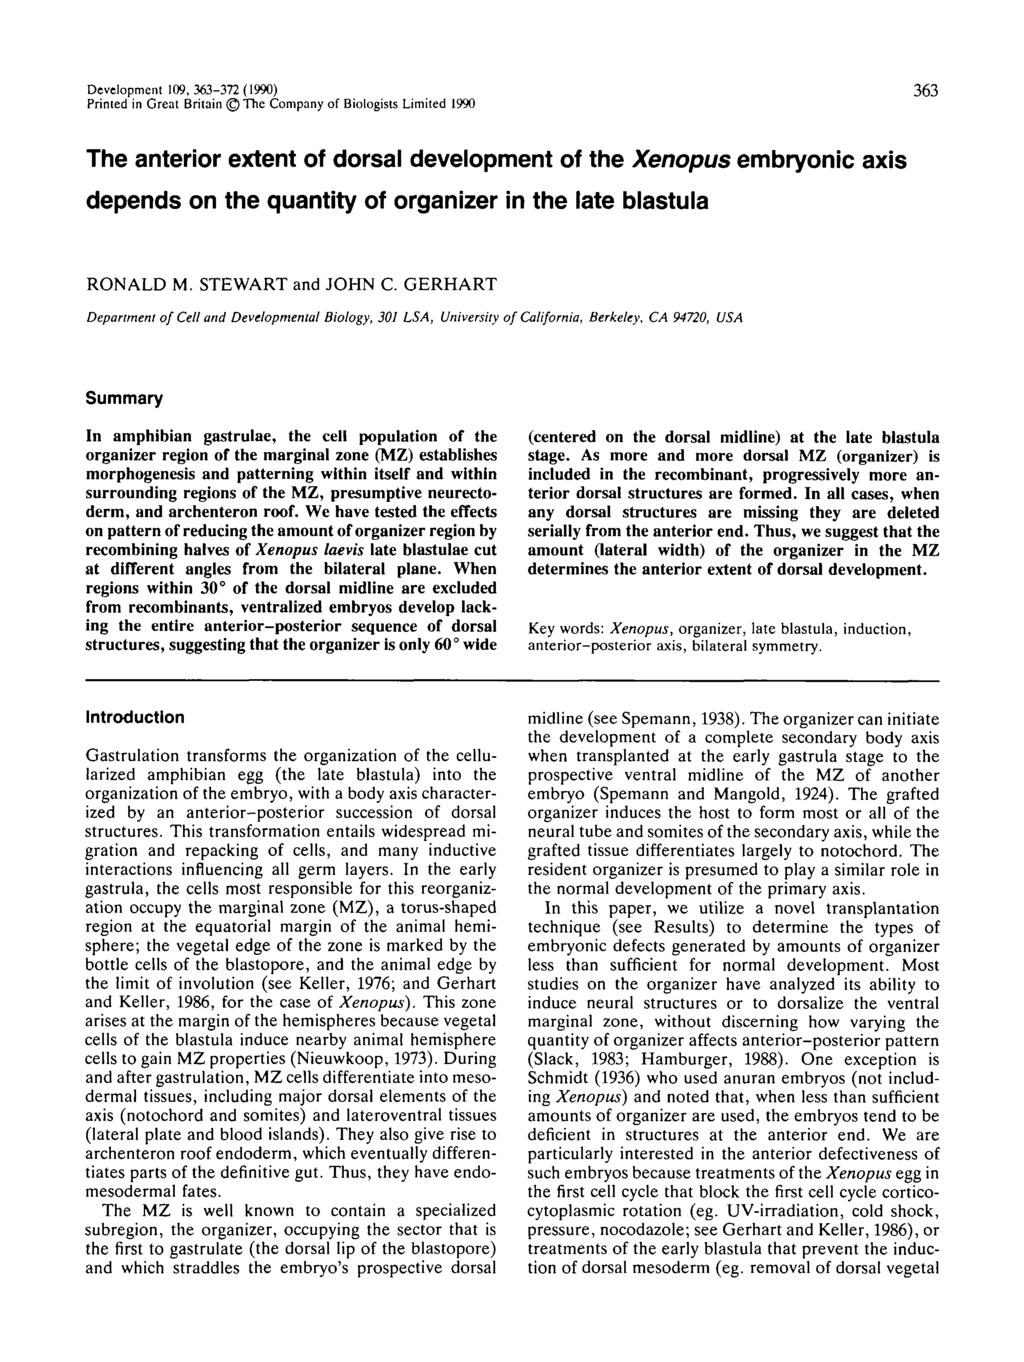 Development 9, -7 (99) Printed in Great Britain The Company of Biologists Limited 99 The anterior extent of dorsal development of the Xenopus embryonic axis depends on the quantity of organizer in